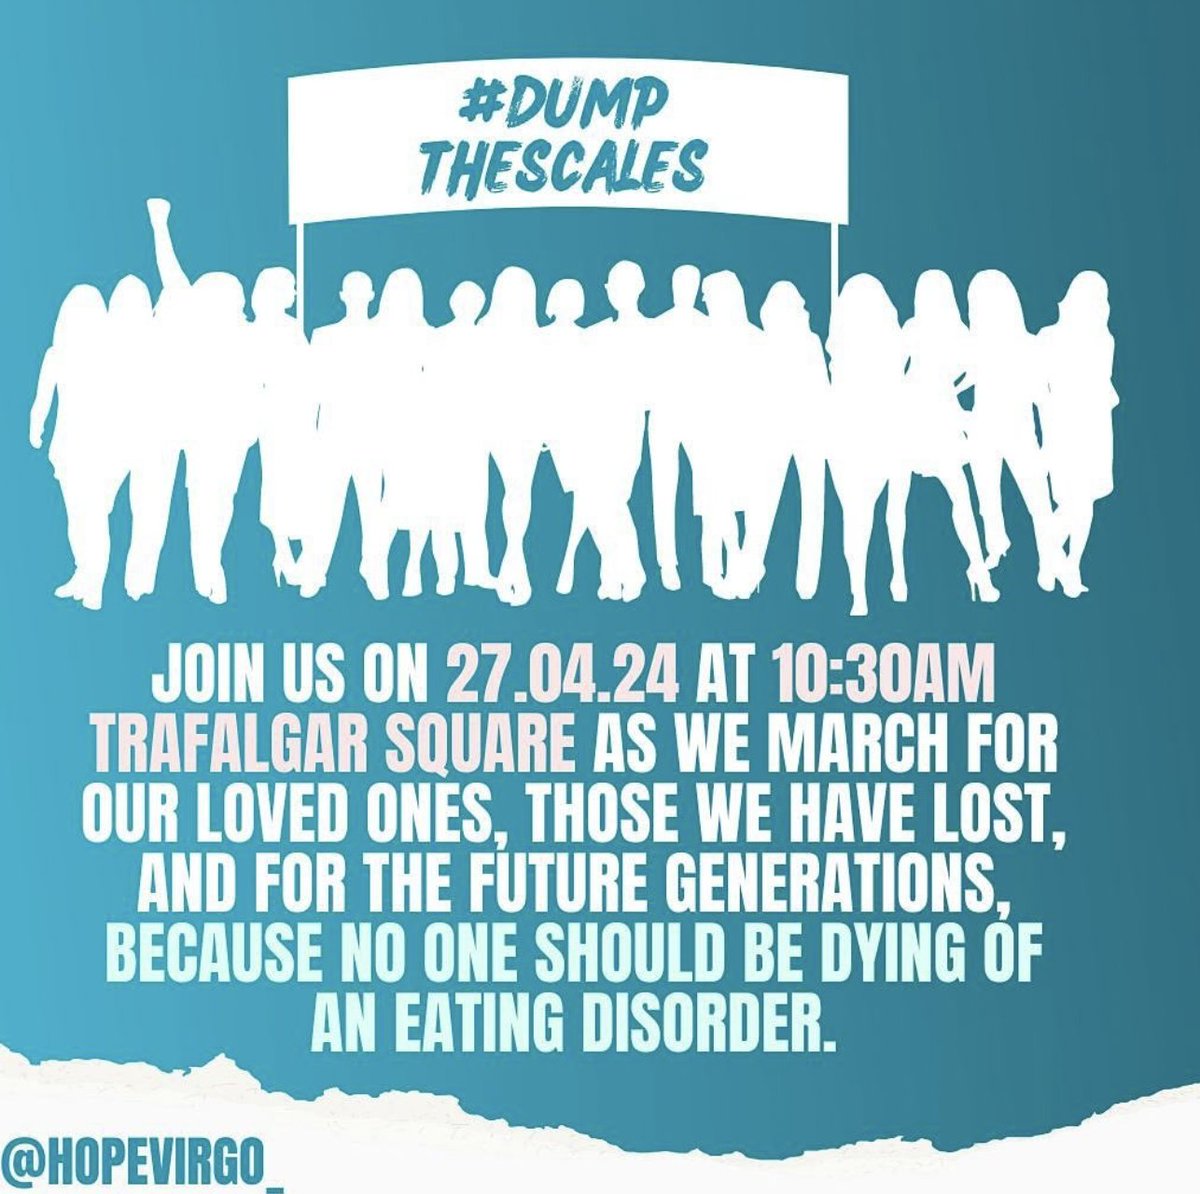 Join @HopeVirgo on April 27th in Trafalgar Square to march for all affected by eating disorders and to encourage people to #DumpTheScales! We hope to see as many of you there as possible! More info: tickettailor.com/events/dumpthe…